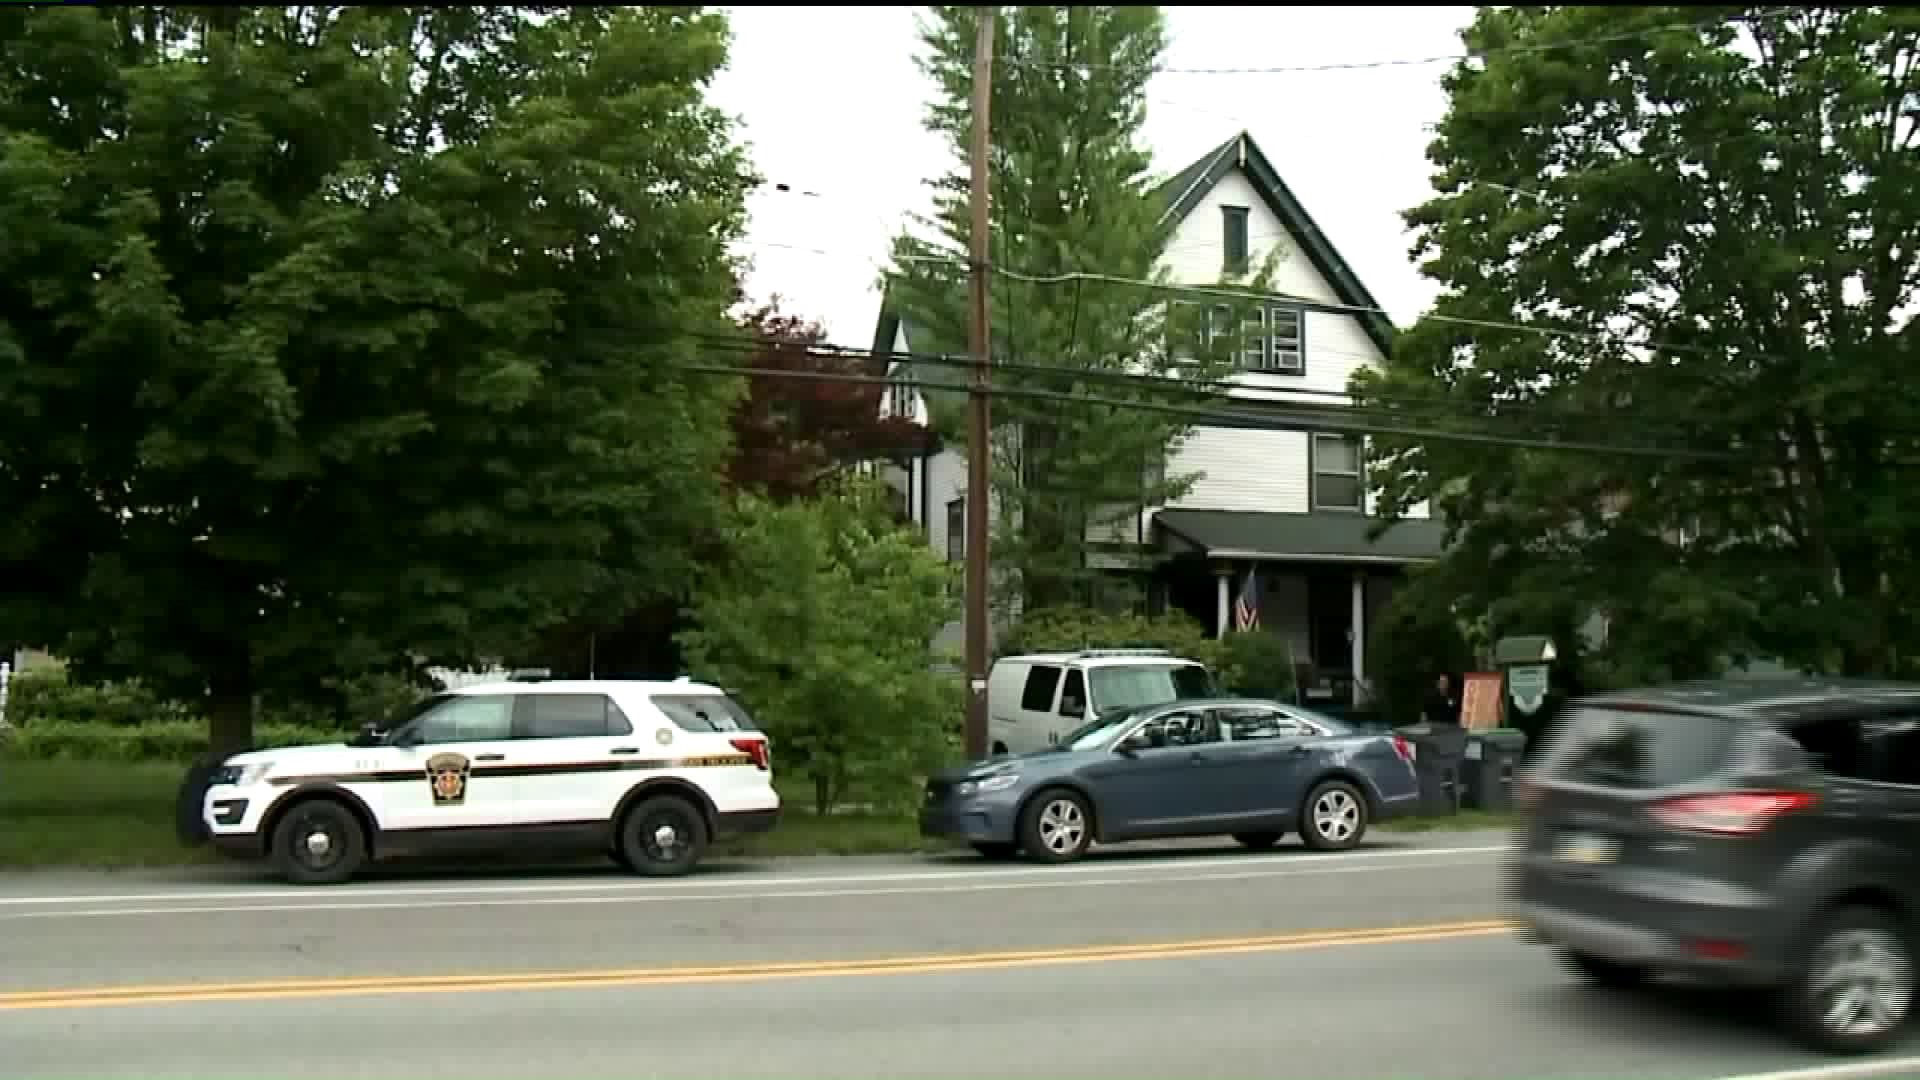 Body of Deceased Woman found at Bed and Breakfast Identified